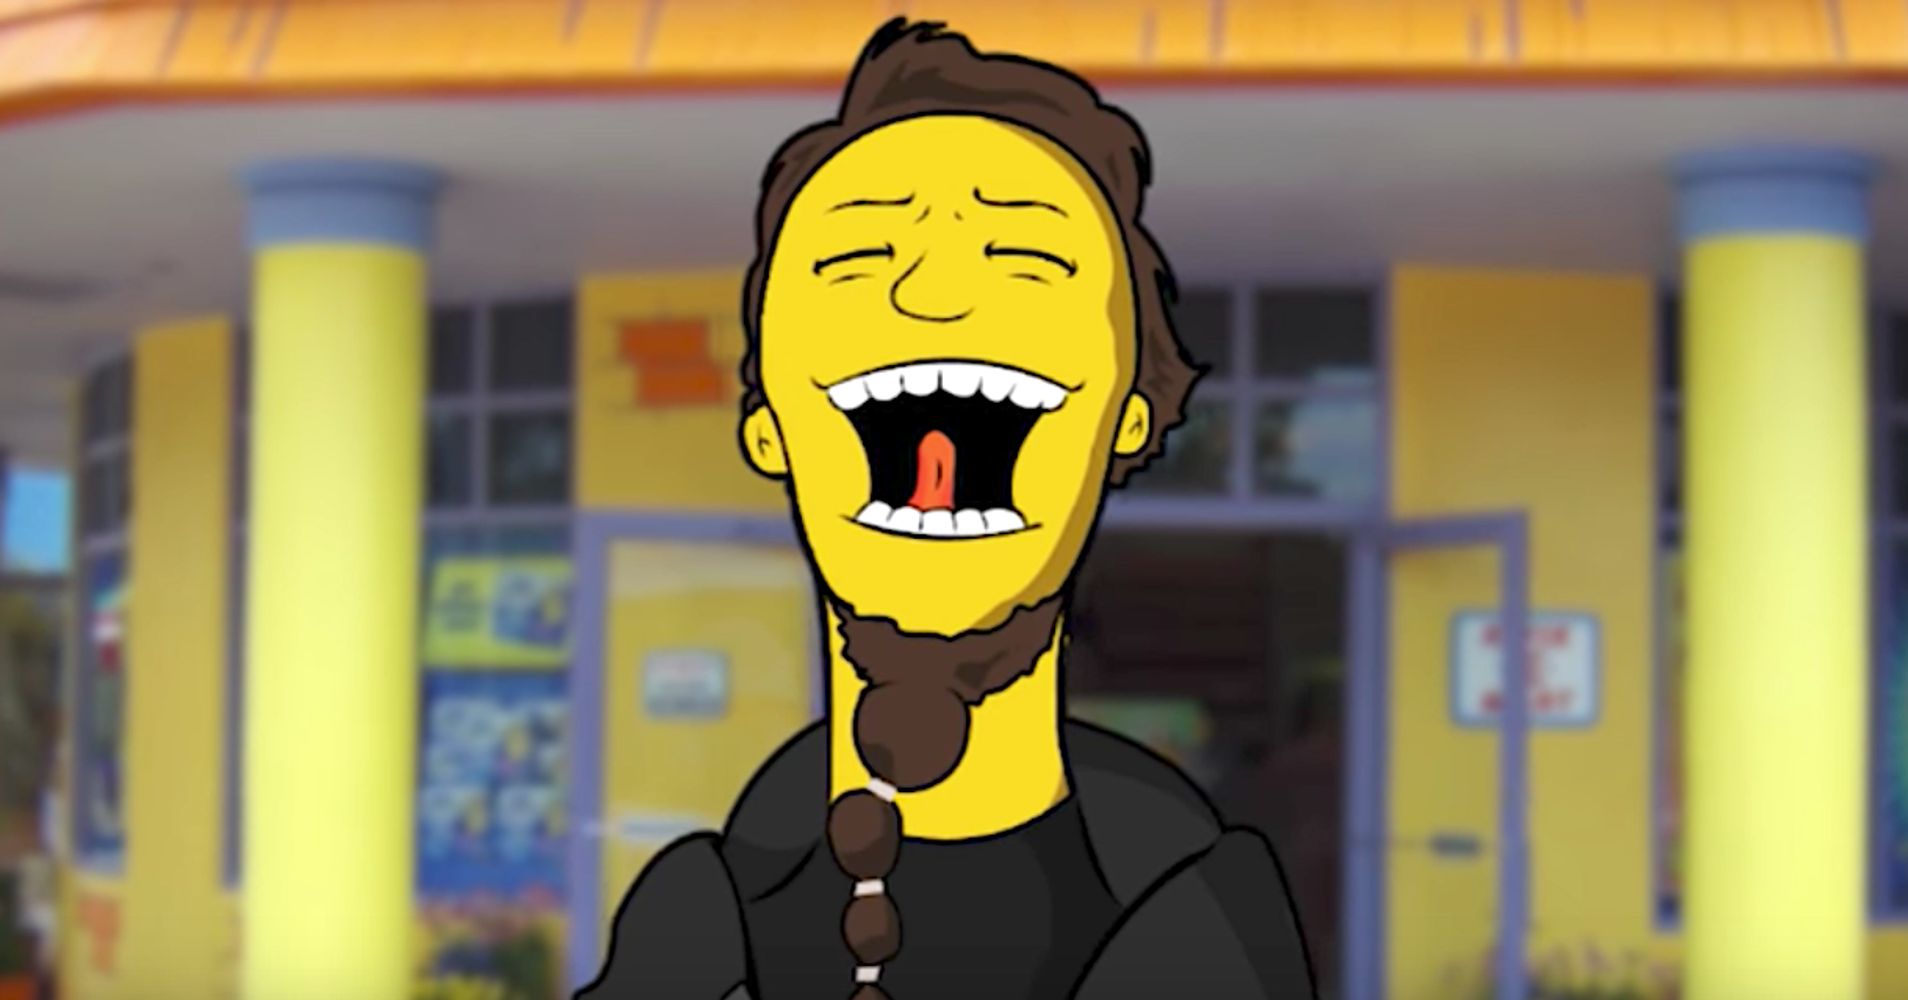 Bang Your Head To This Heavy Metal Cover Of 'The Simpsons' Theme | HuffPost1908 x 1000